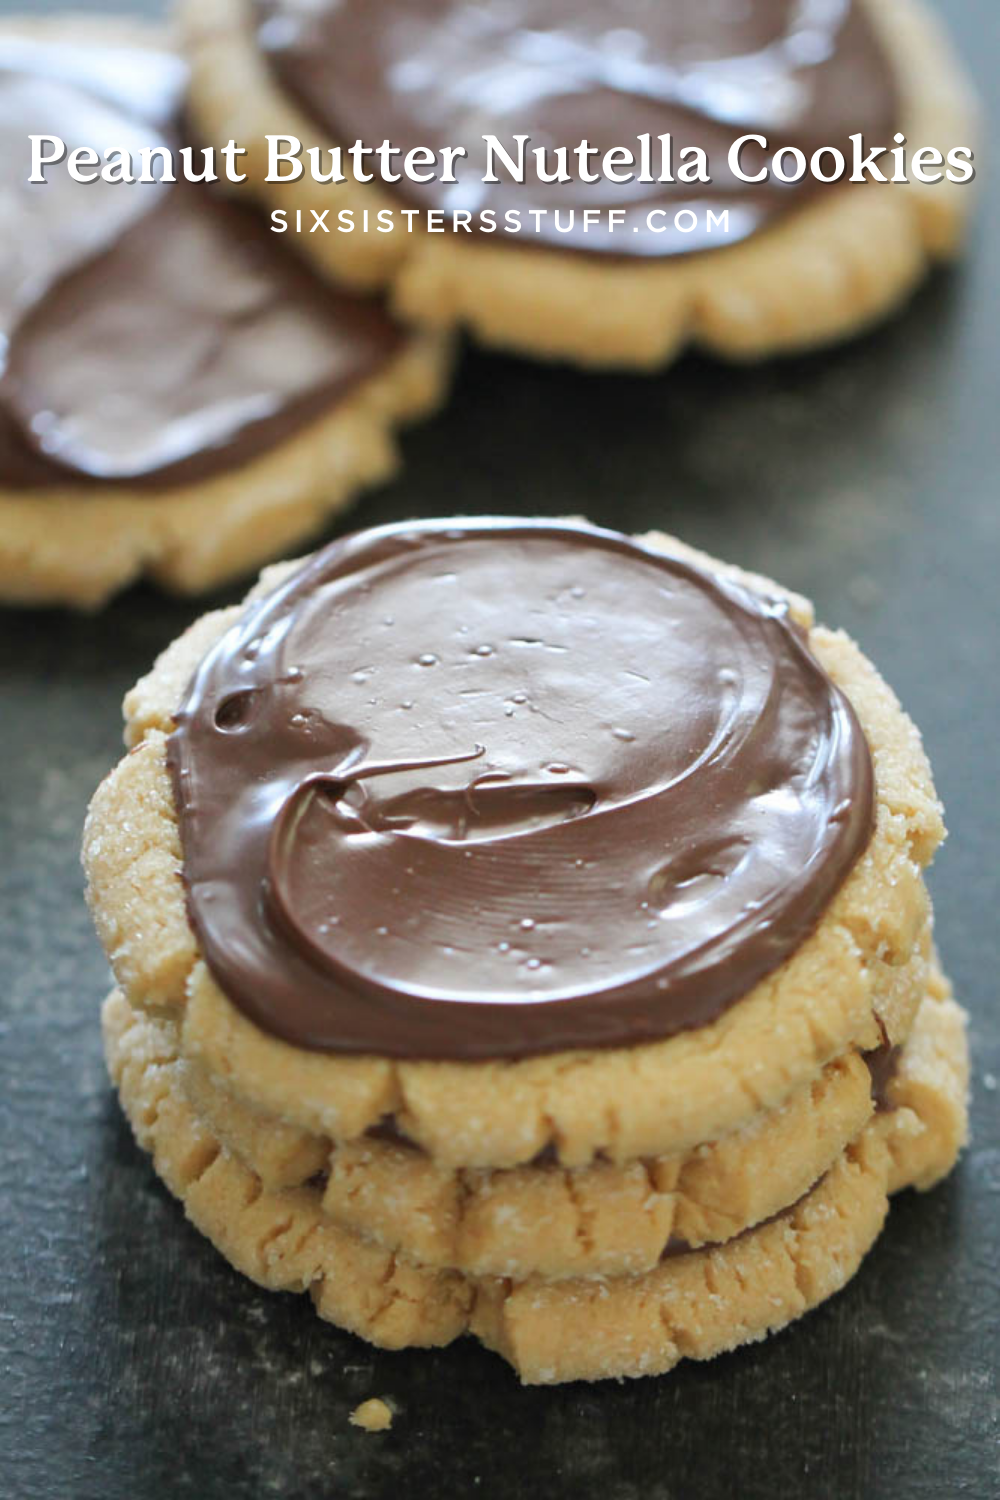 frosted peanut butter cookies with nutella on top